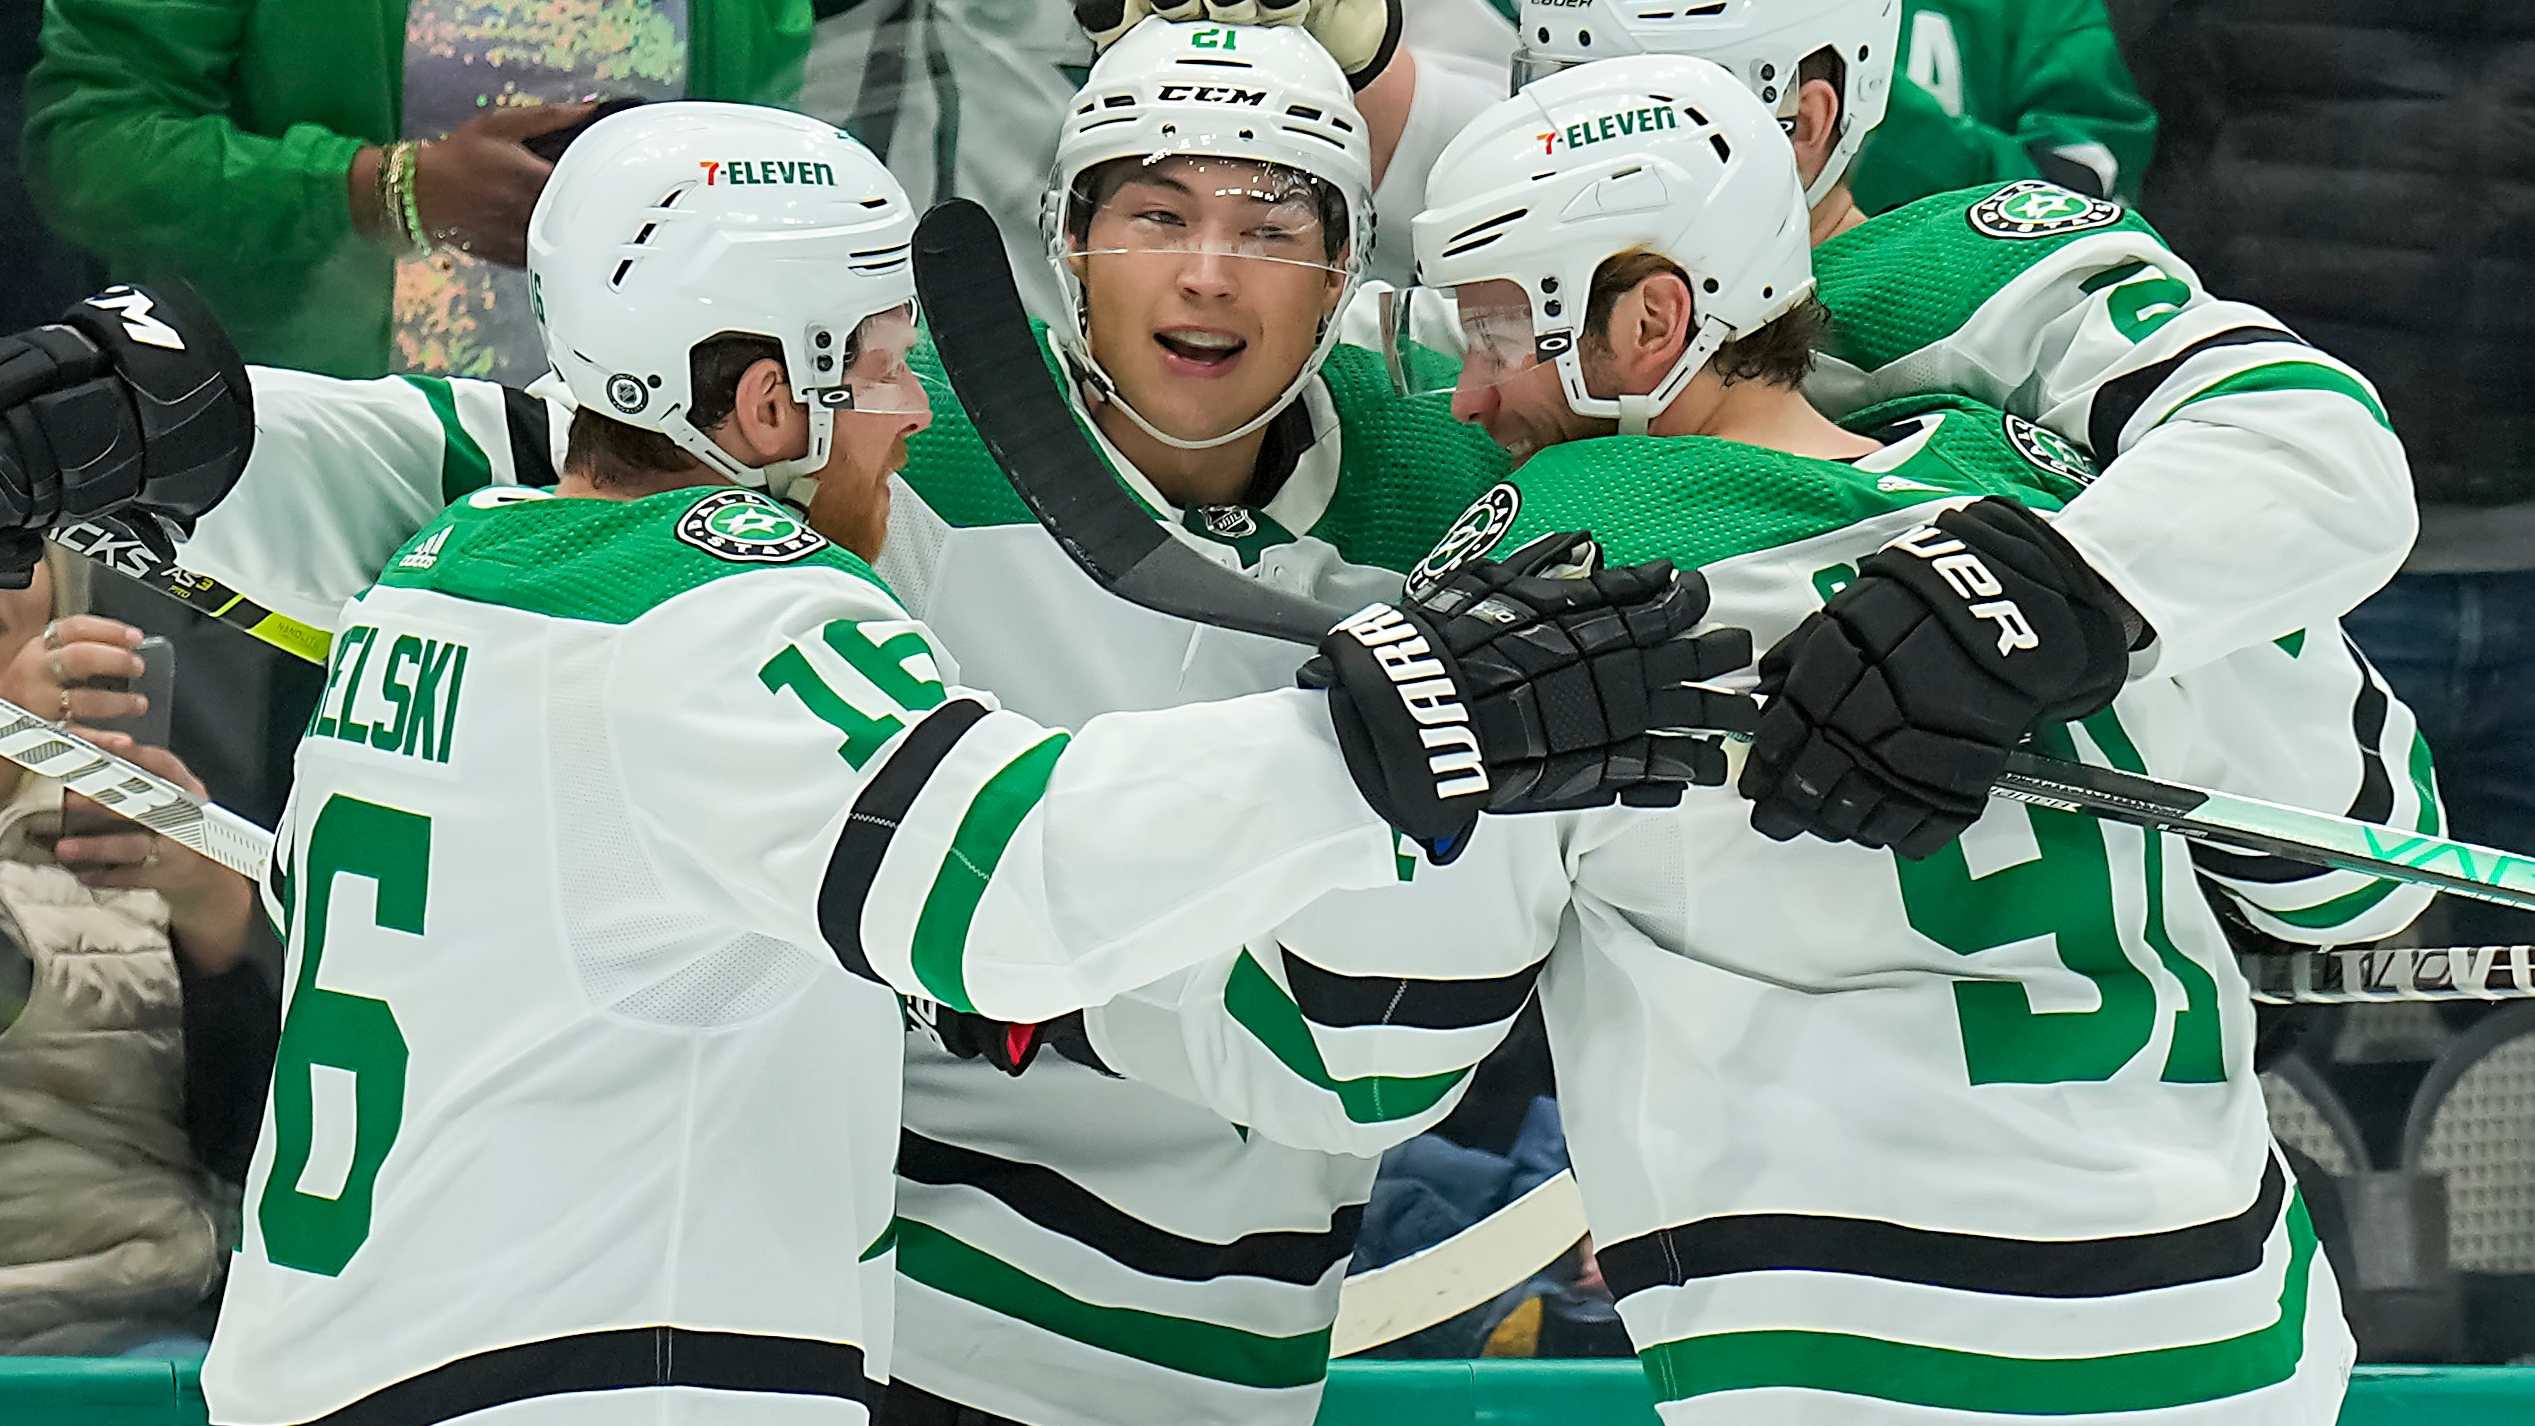 Dallas Stars conclude their roadtrip visiting New Jersey to play the Devils